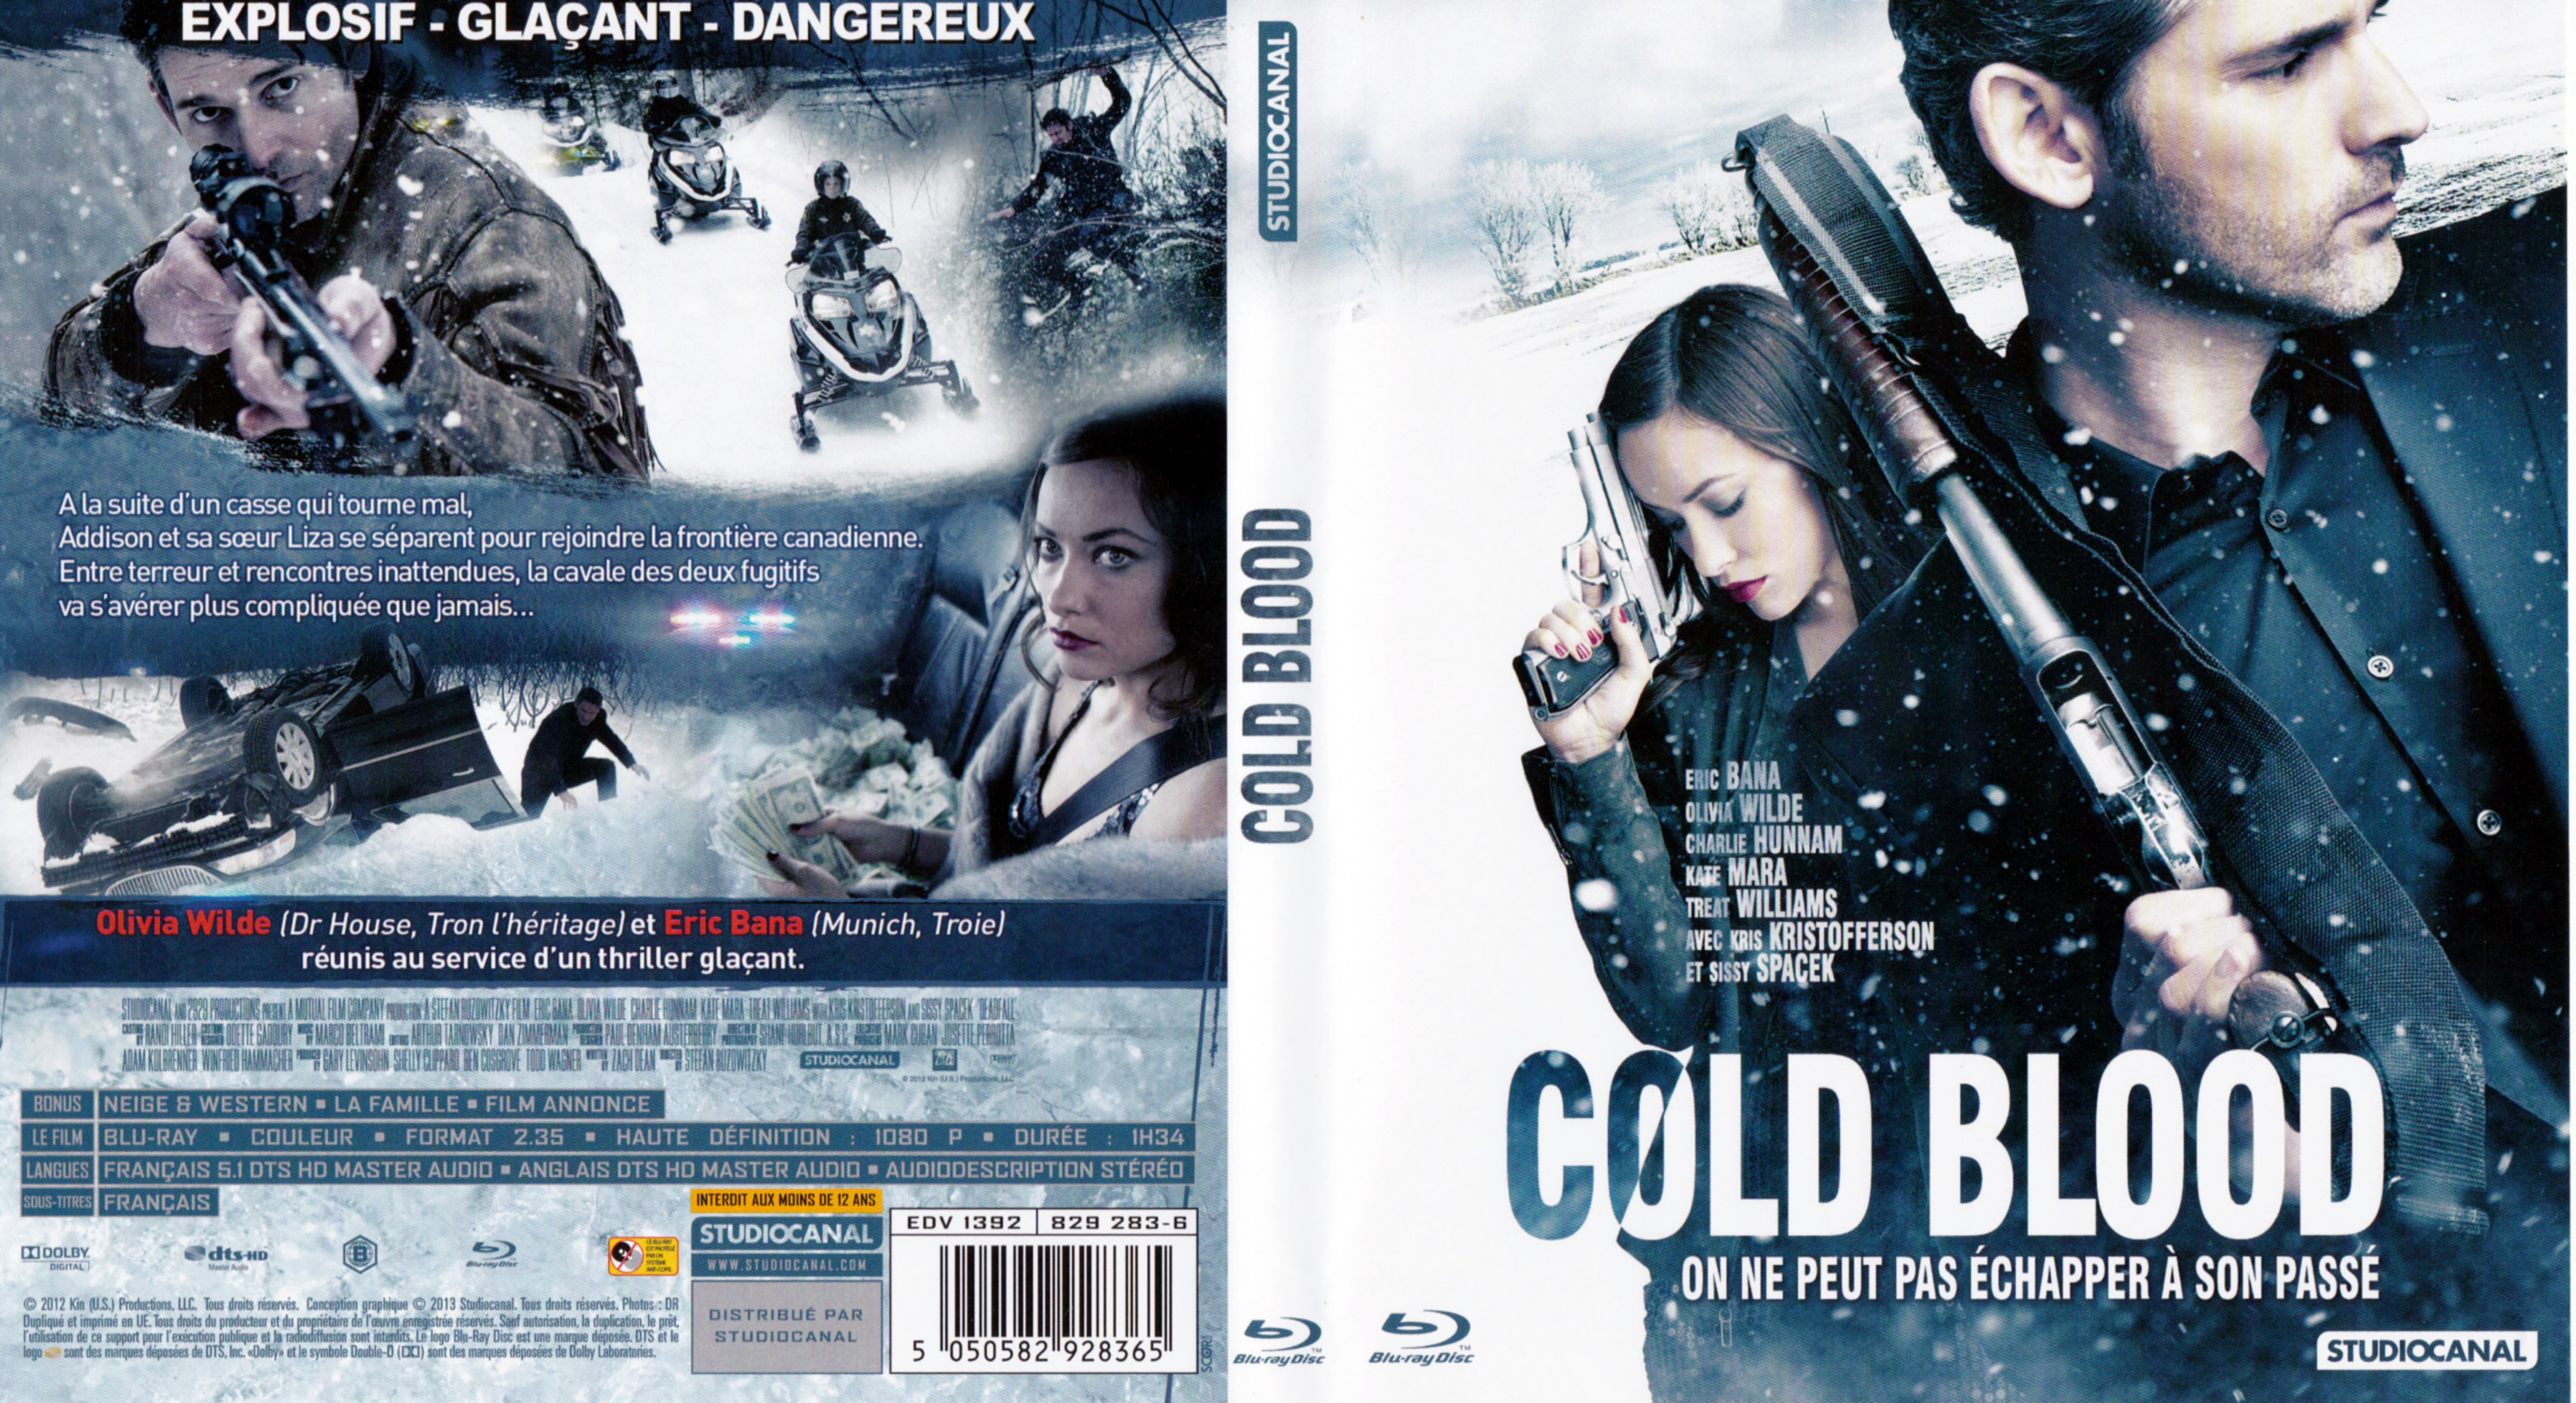 Jaquette DVD Cold Blood (BLU-RAY)